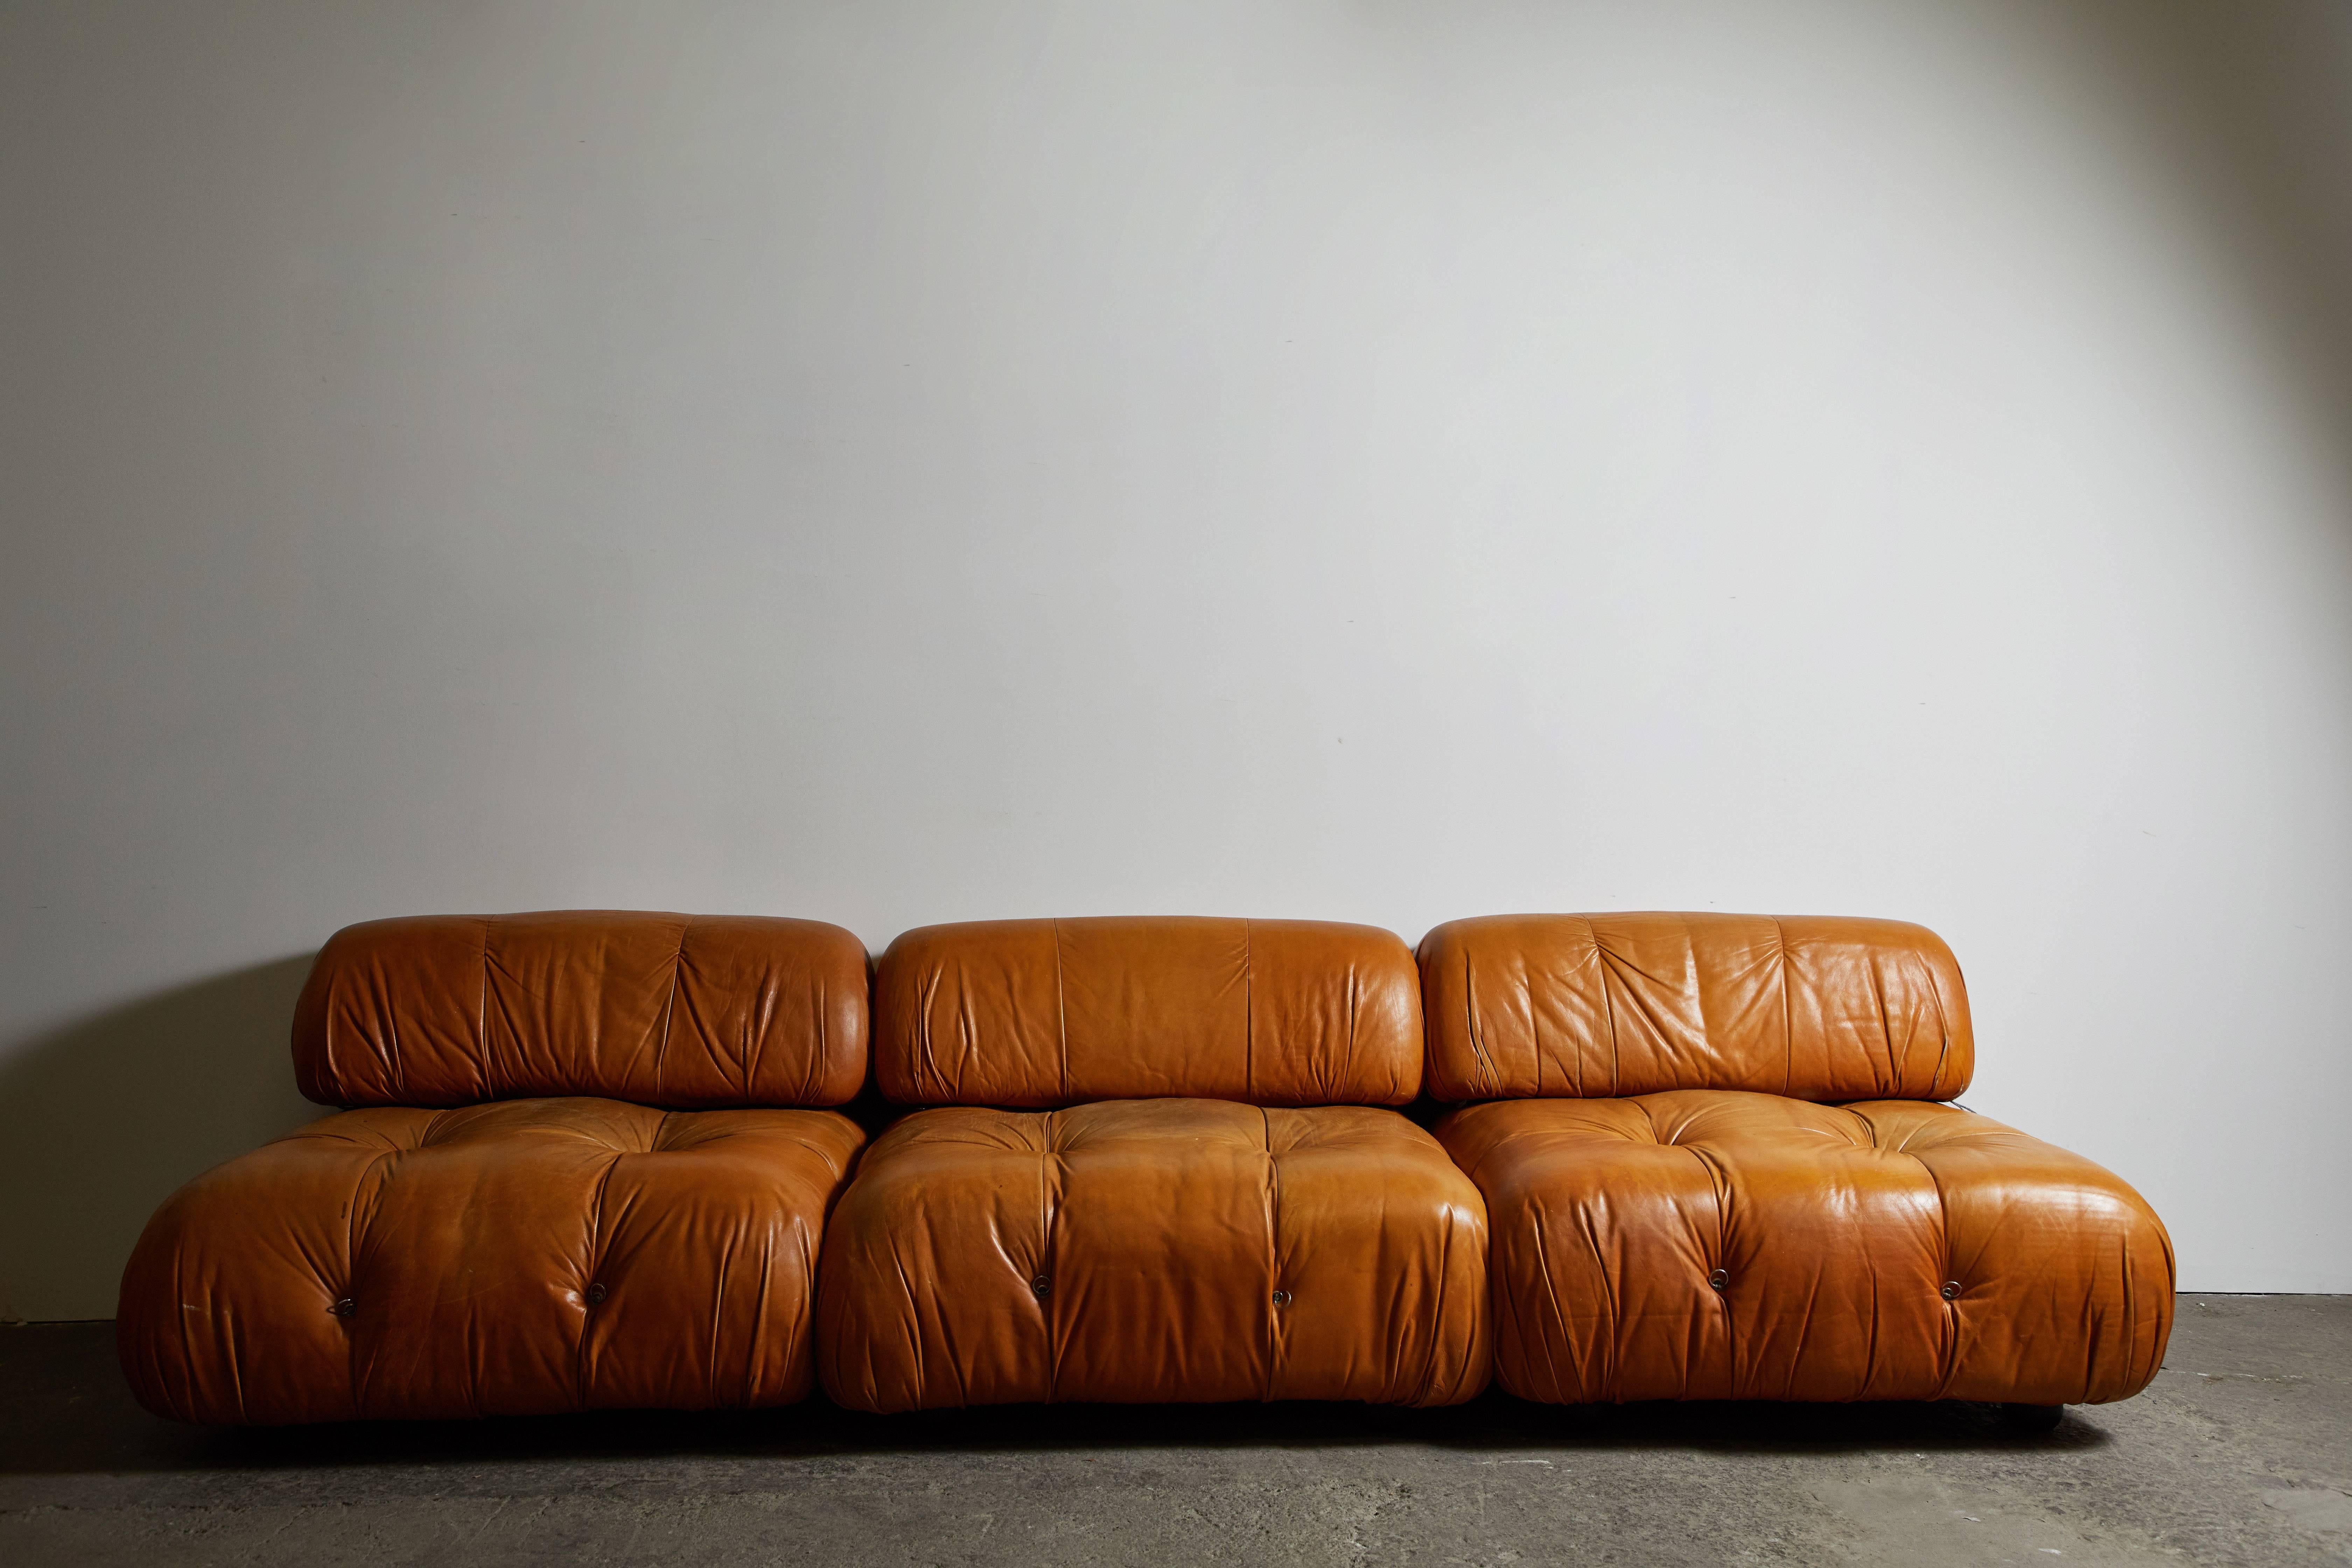 First production, original cognac leather modular Camaleonda sofa by Mario Bellini for C&B Italia. Made in Italy circa 1971. Unlimited cushion system

The sectional elements of this can be used freely and apart from one another. The backs are